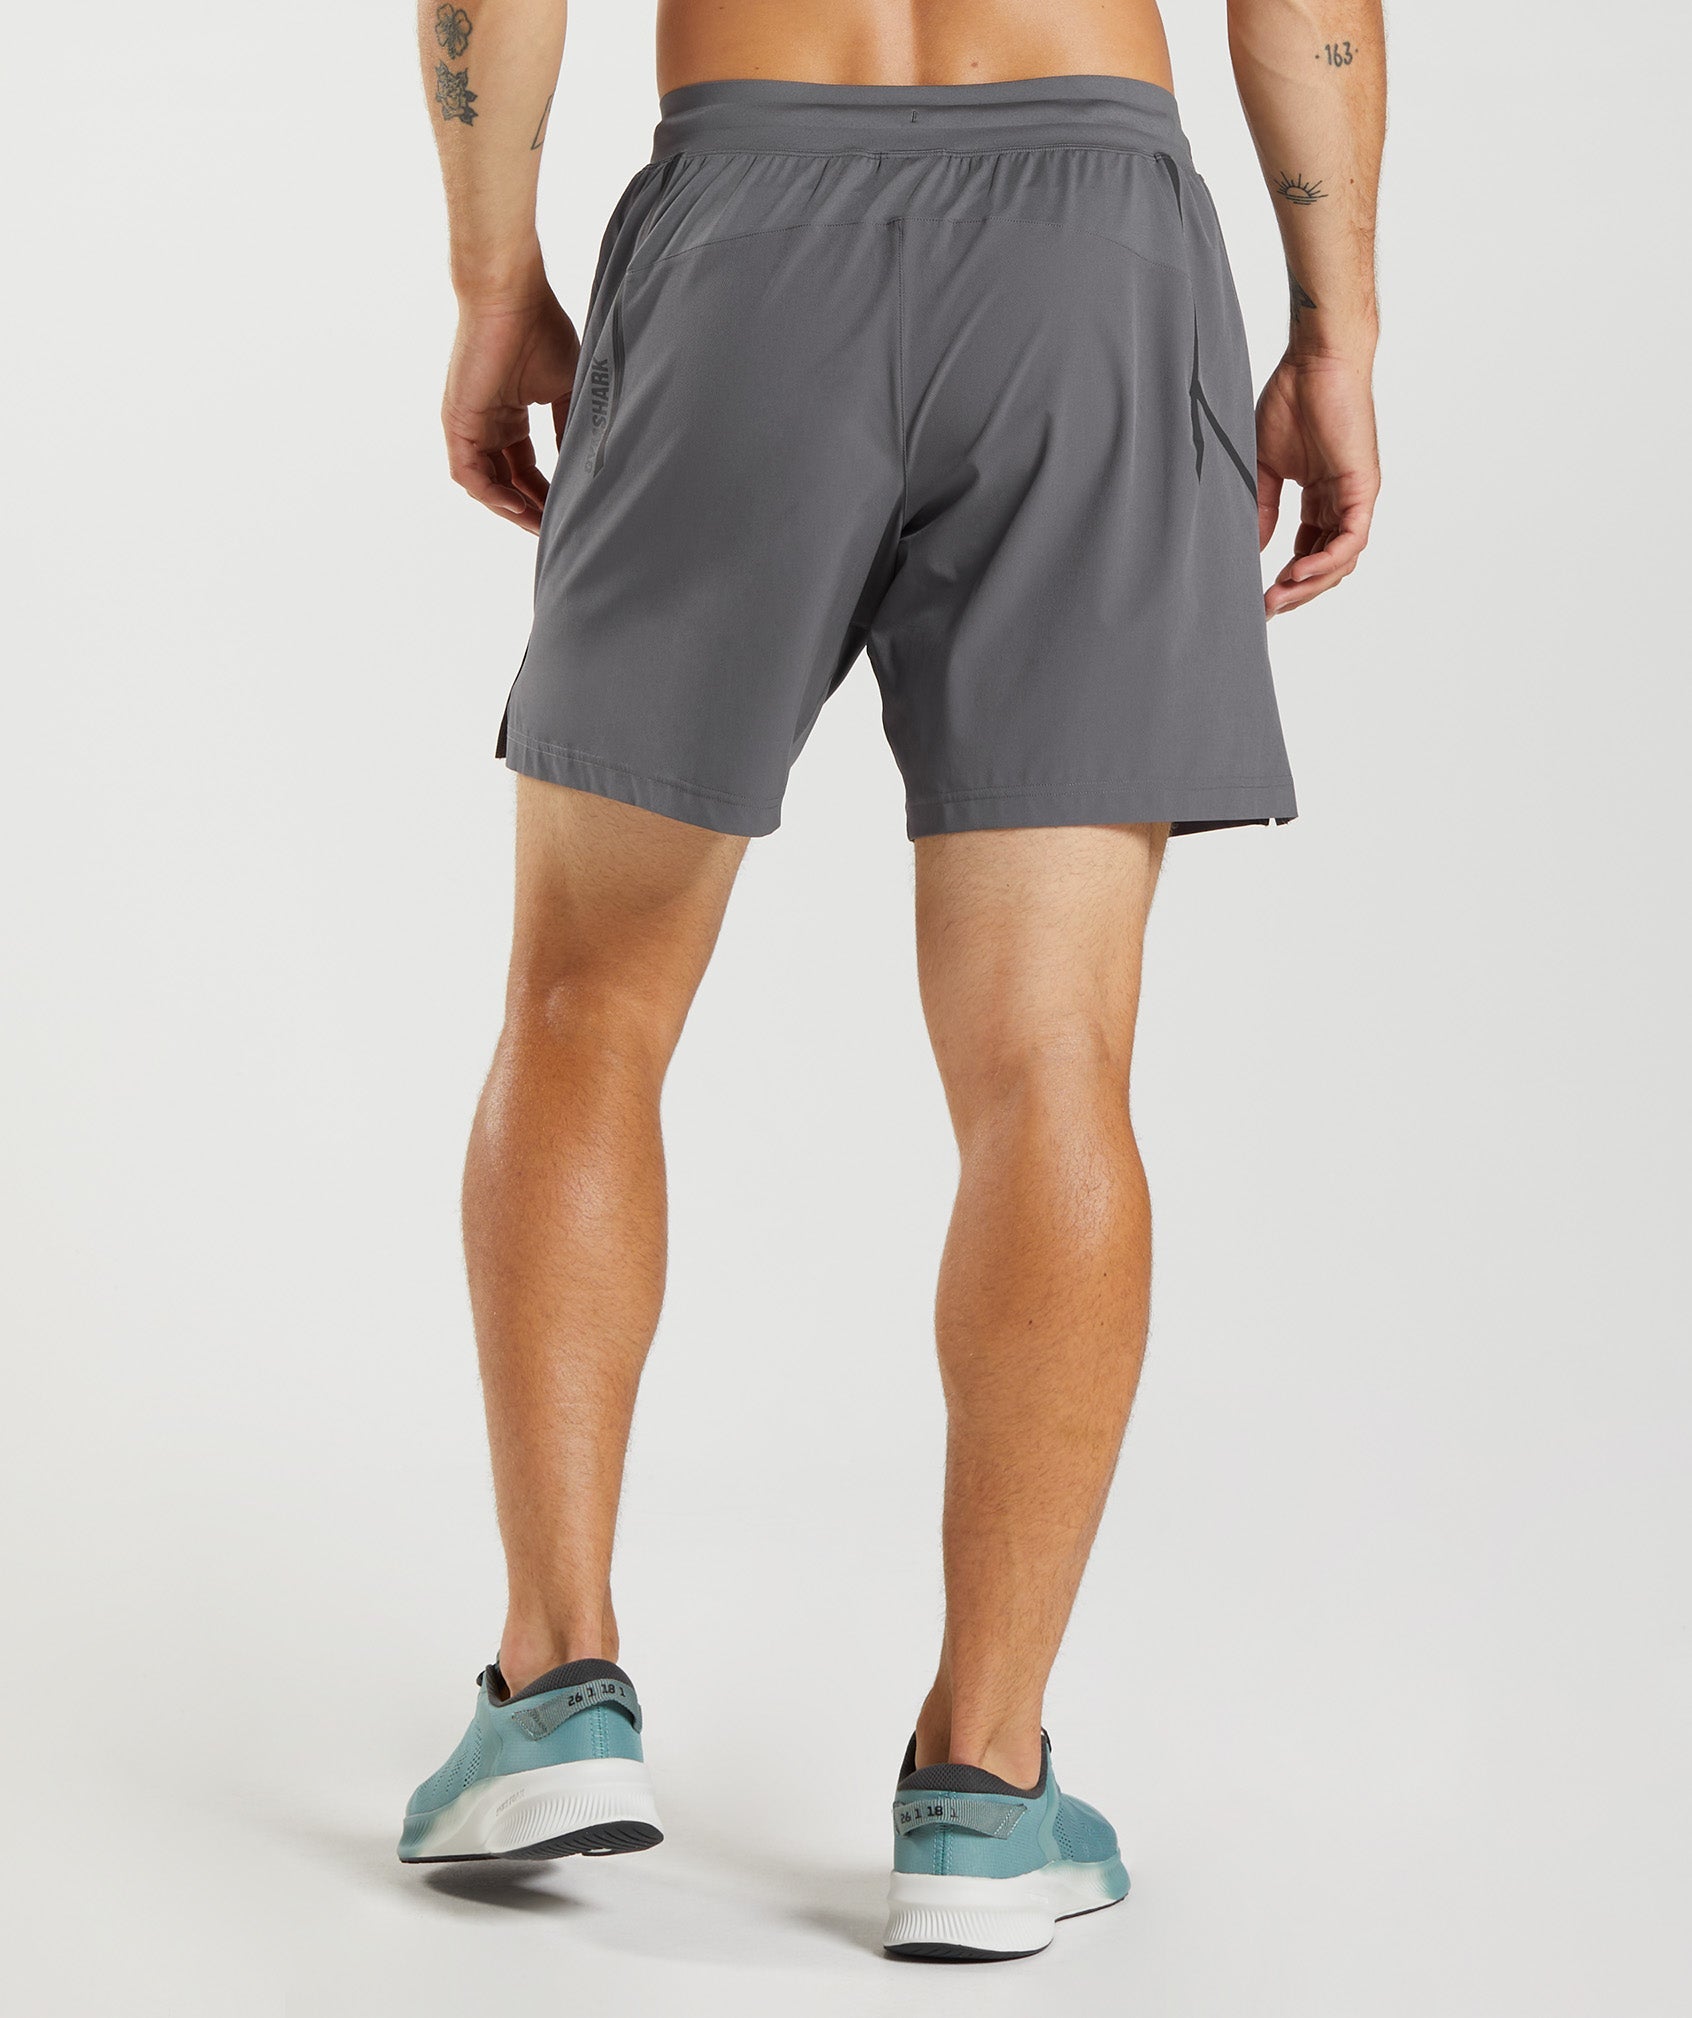 Apex 8" Function Shorts in Silhouette Grey - view 2